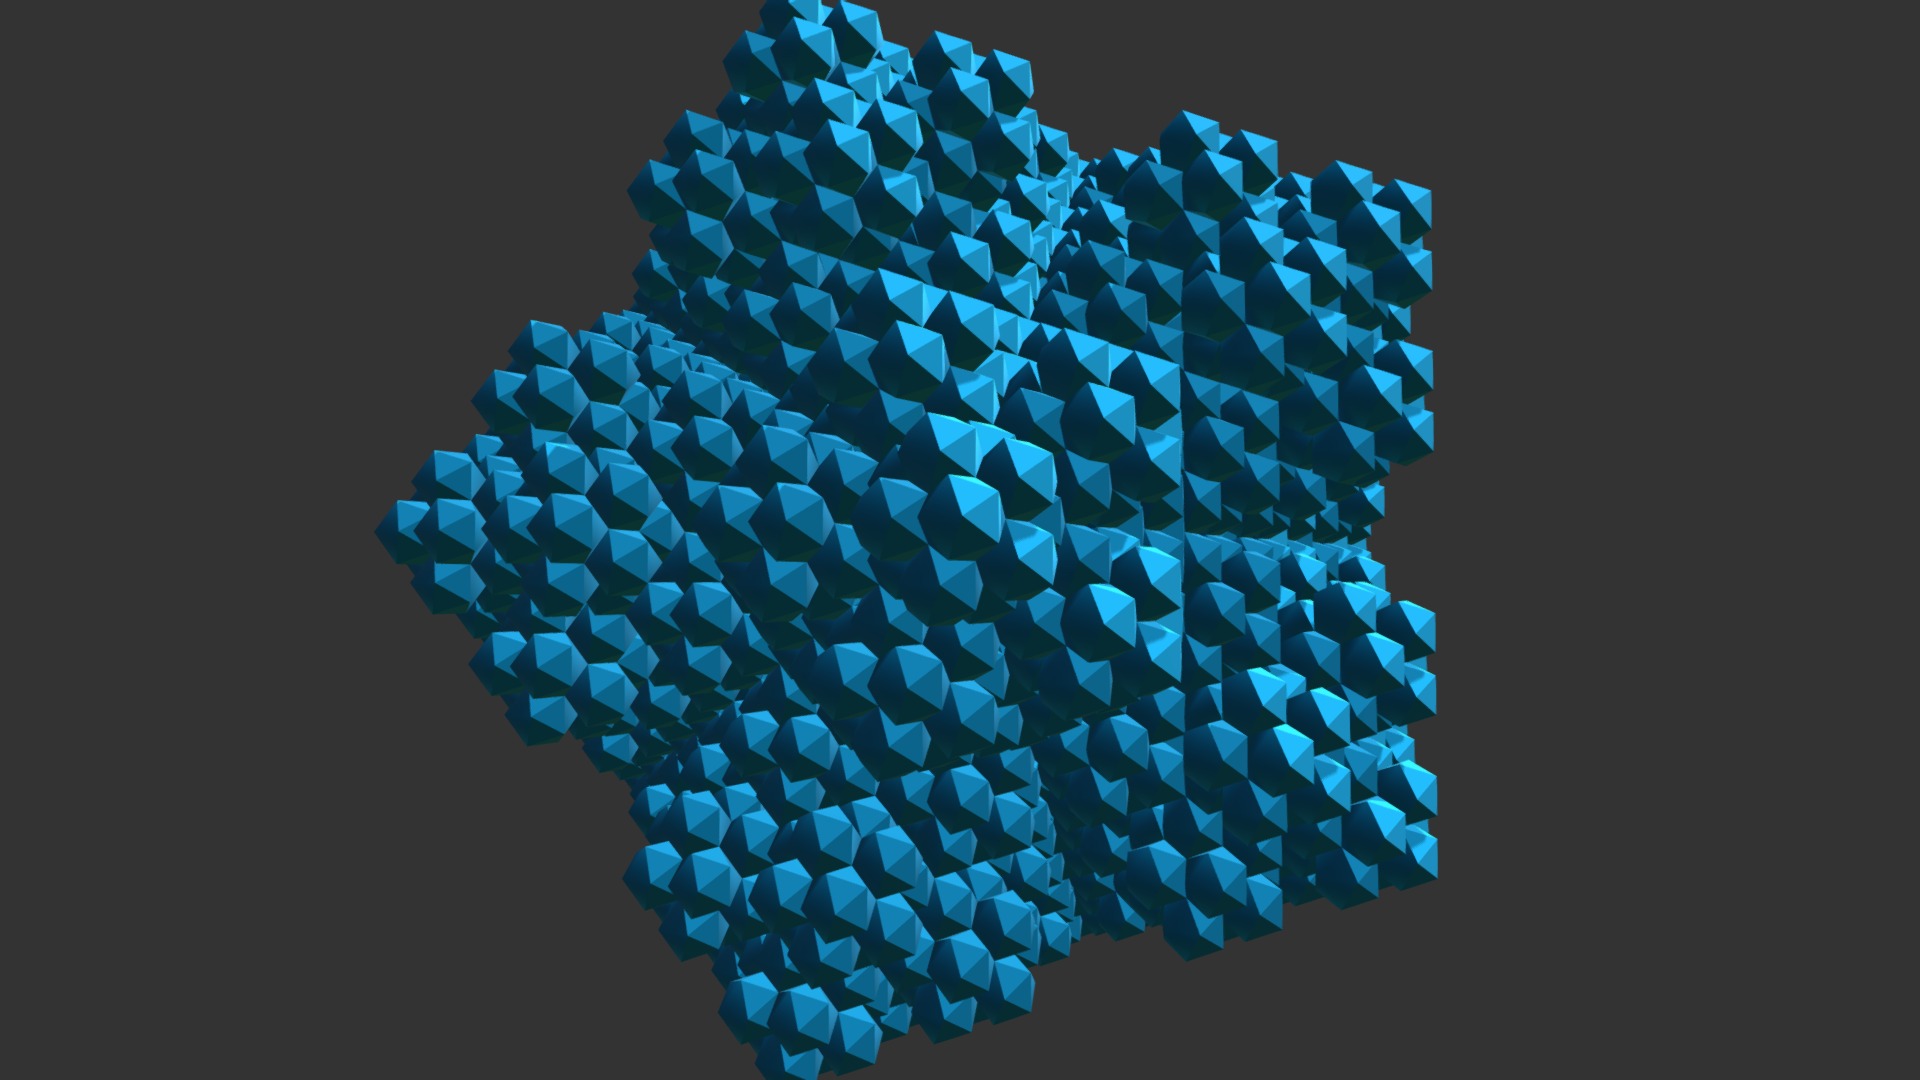 3D model Icosahedral gasket, stage 3 - This is a 3D model of the Icosahedral gasket, stage 3. The 3D model is about a blue and black net.